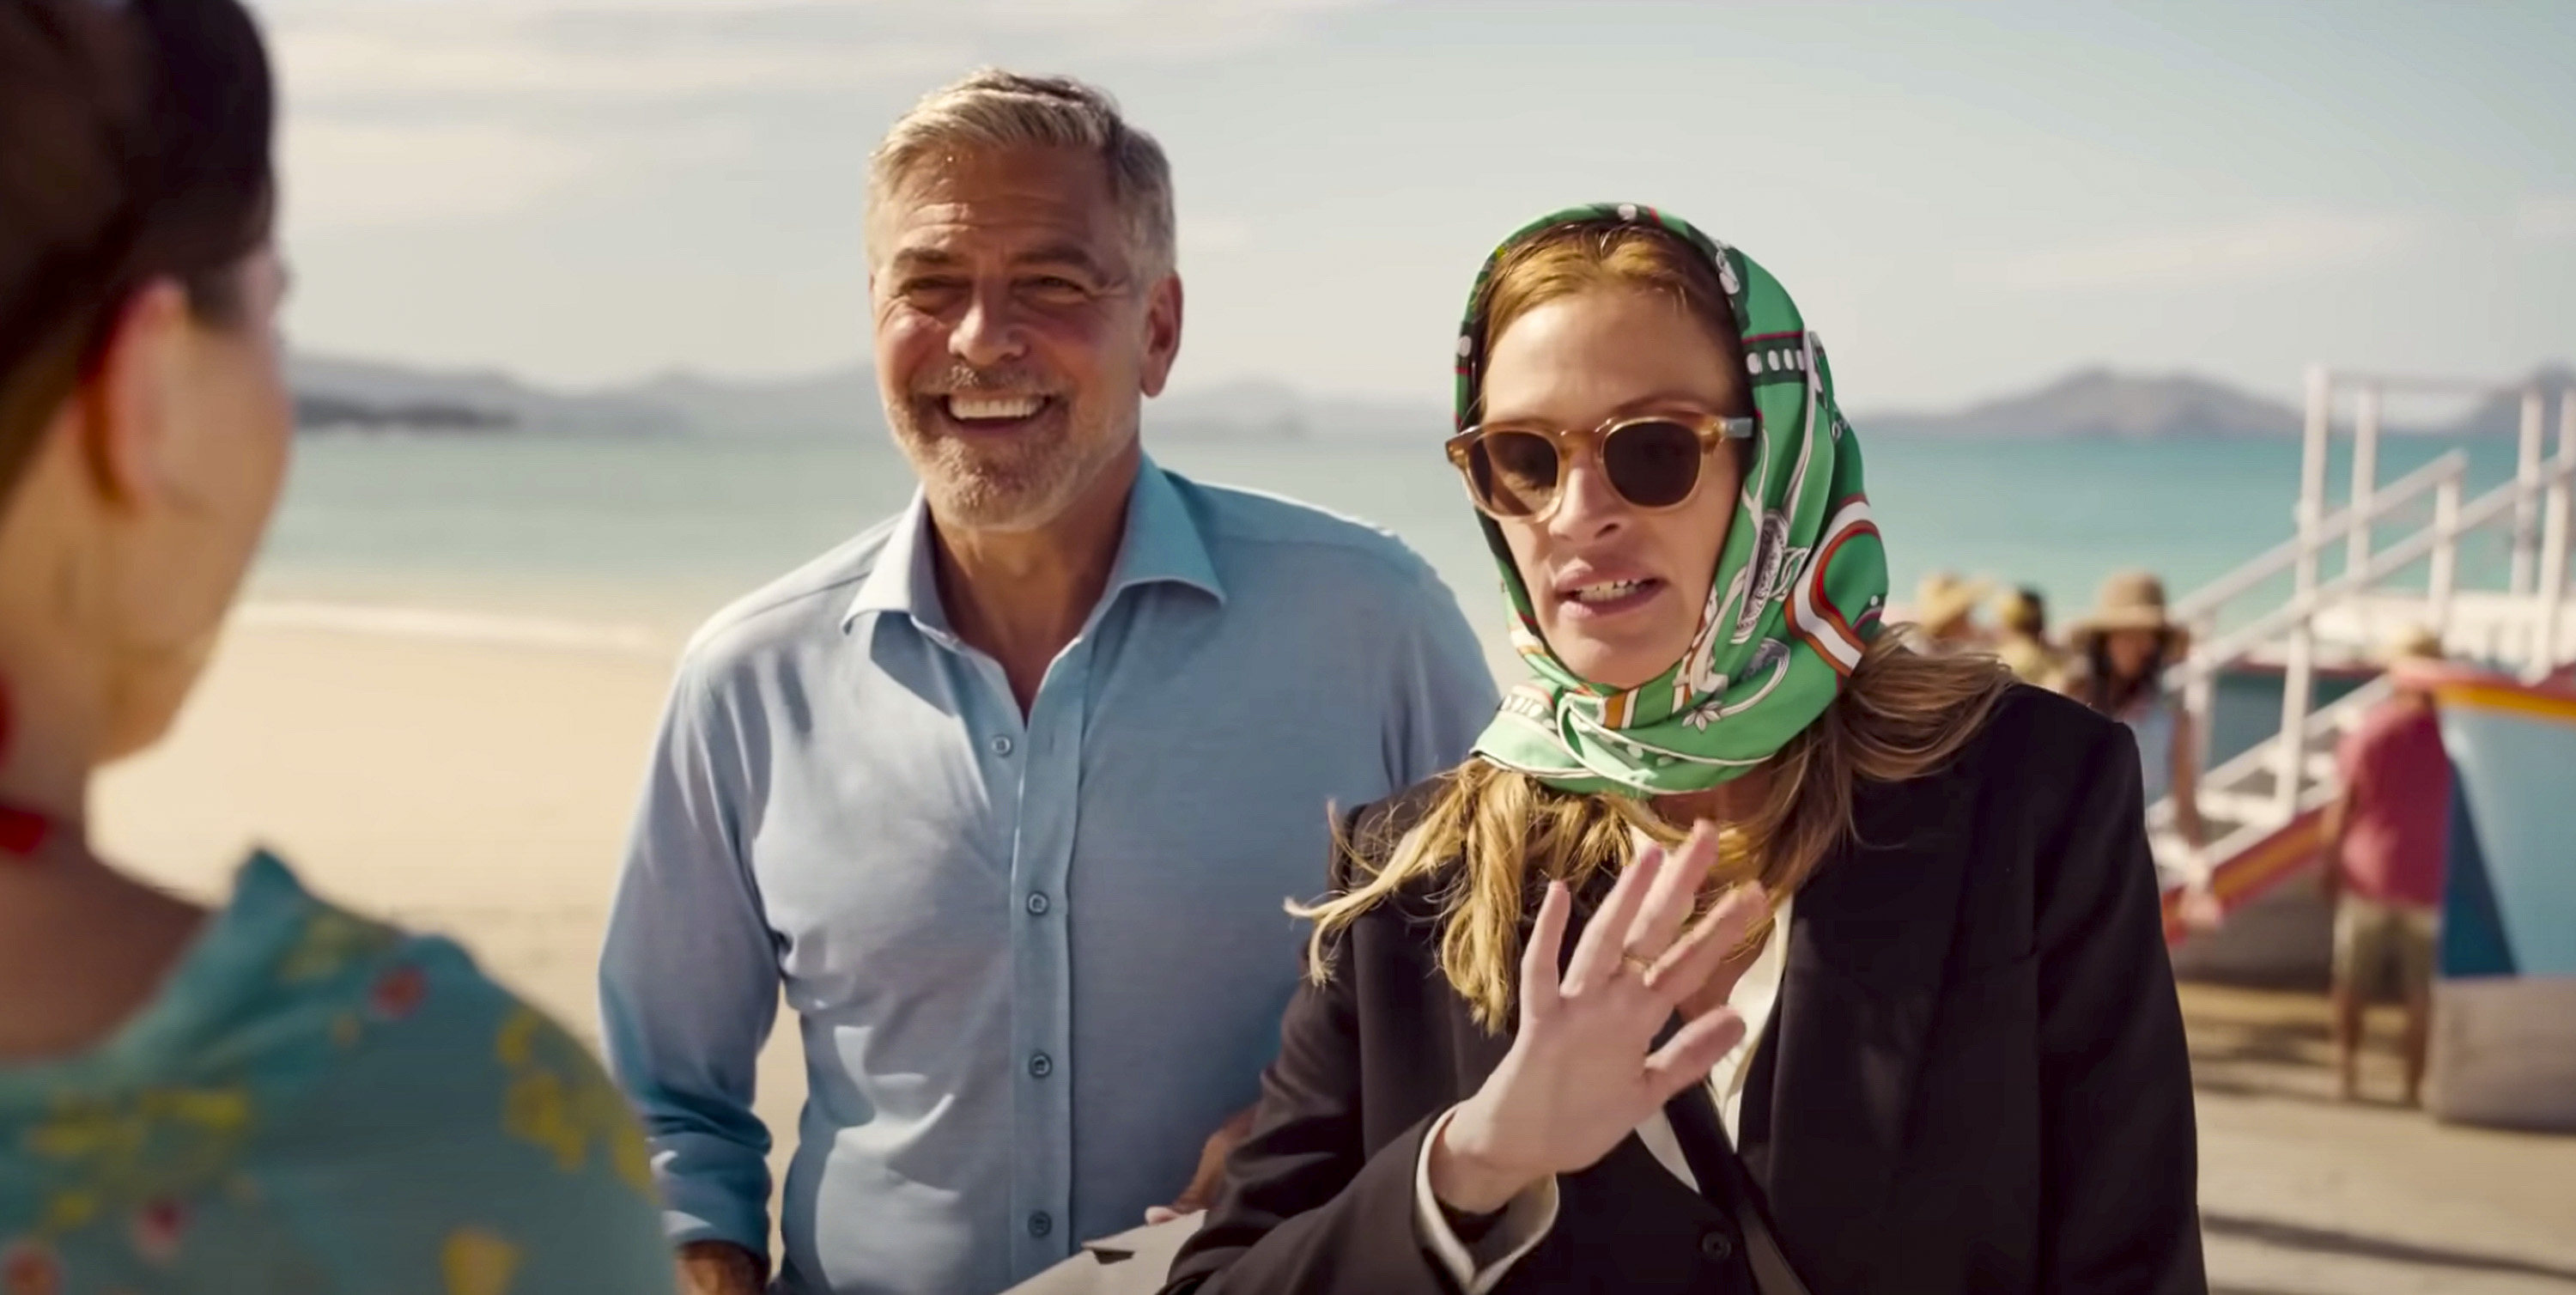 Set in Bali, filmed in Australia: Ticket to Paradise starring George  Clooney, Julia Roberts, Maxime Bouttier sparks debate on 'colonial gaze